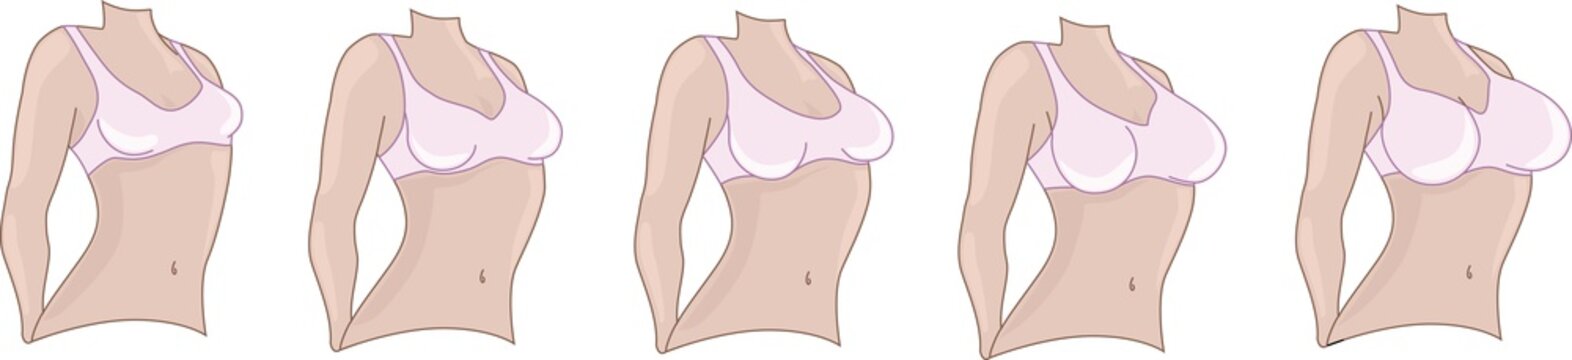 Woman breast size. Boobs sizes from small to big.